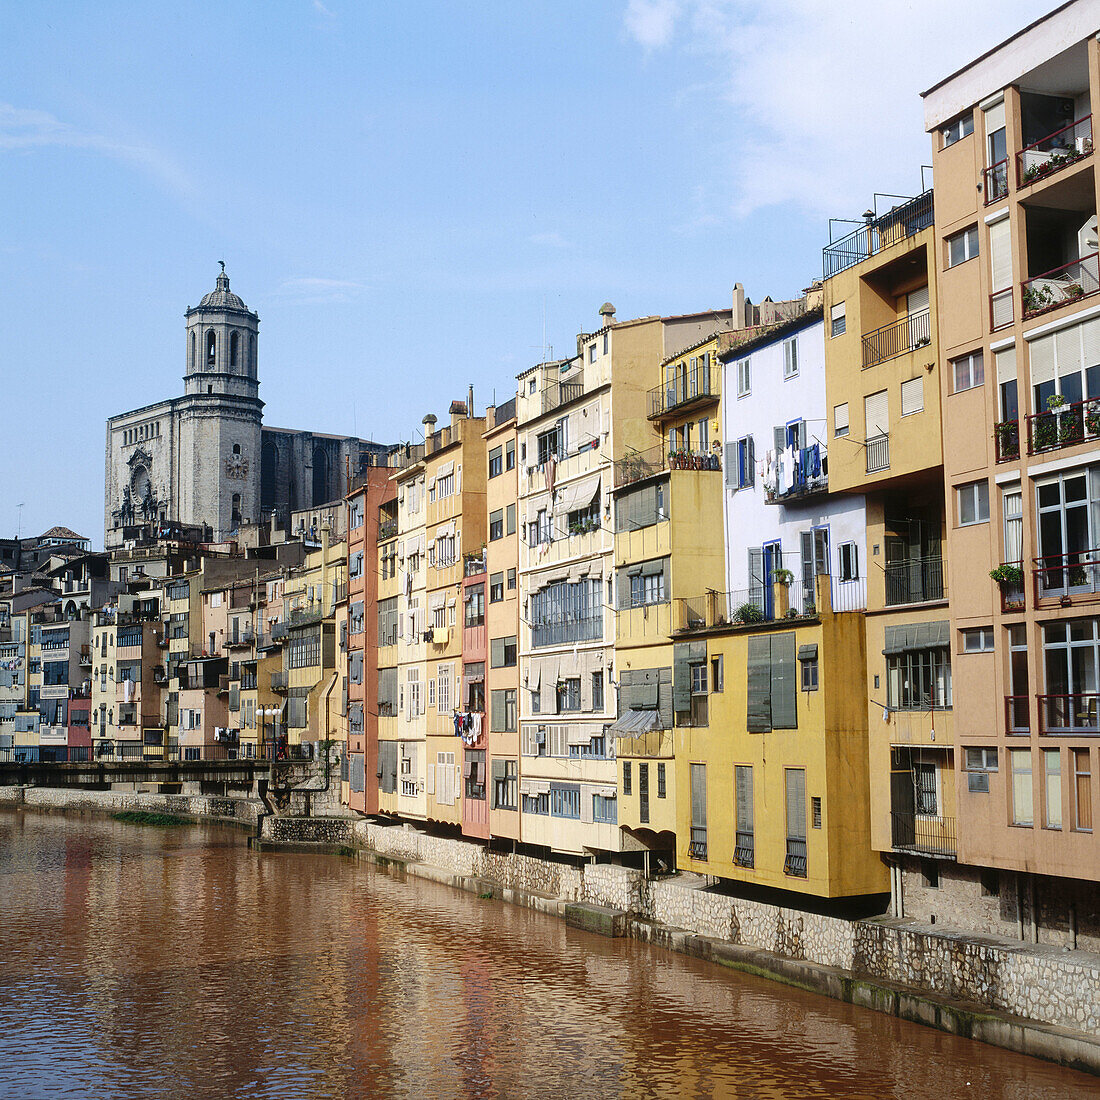 Onyar river with cathedral in background. Girona, Catalonia, Spain